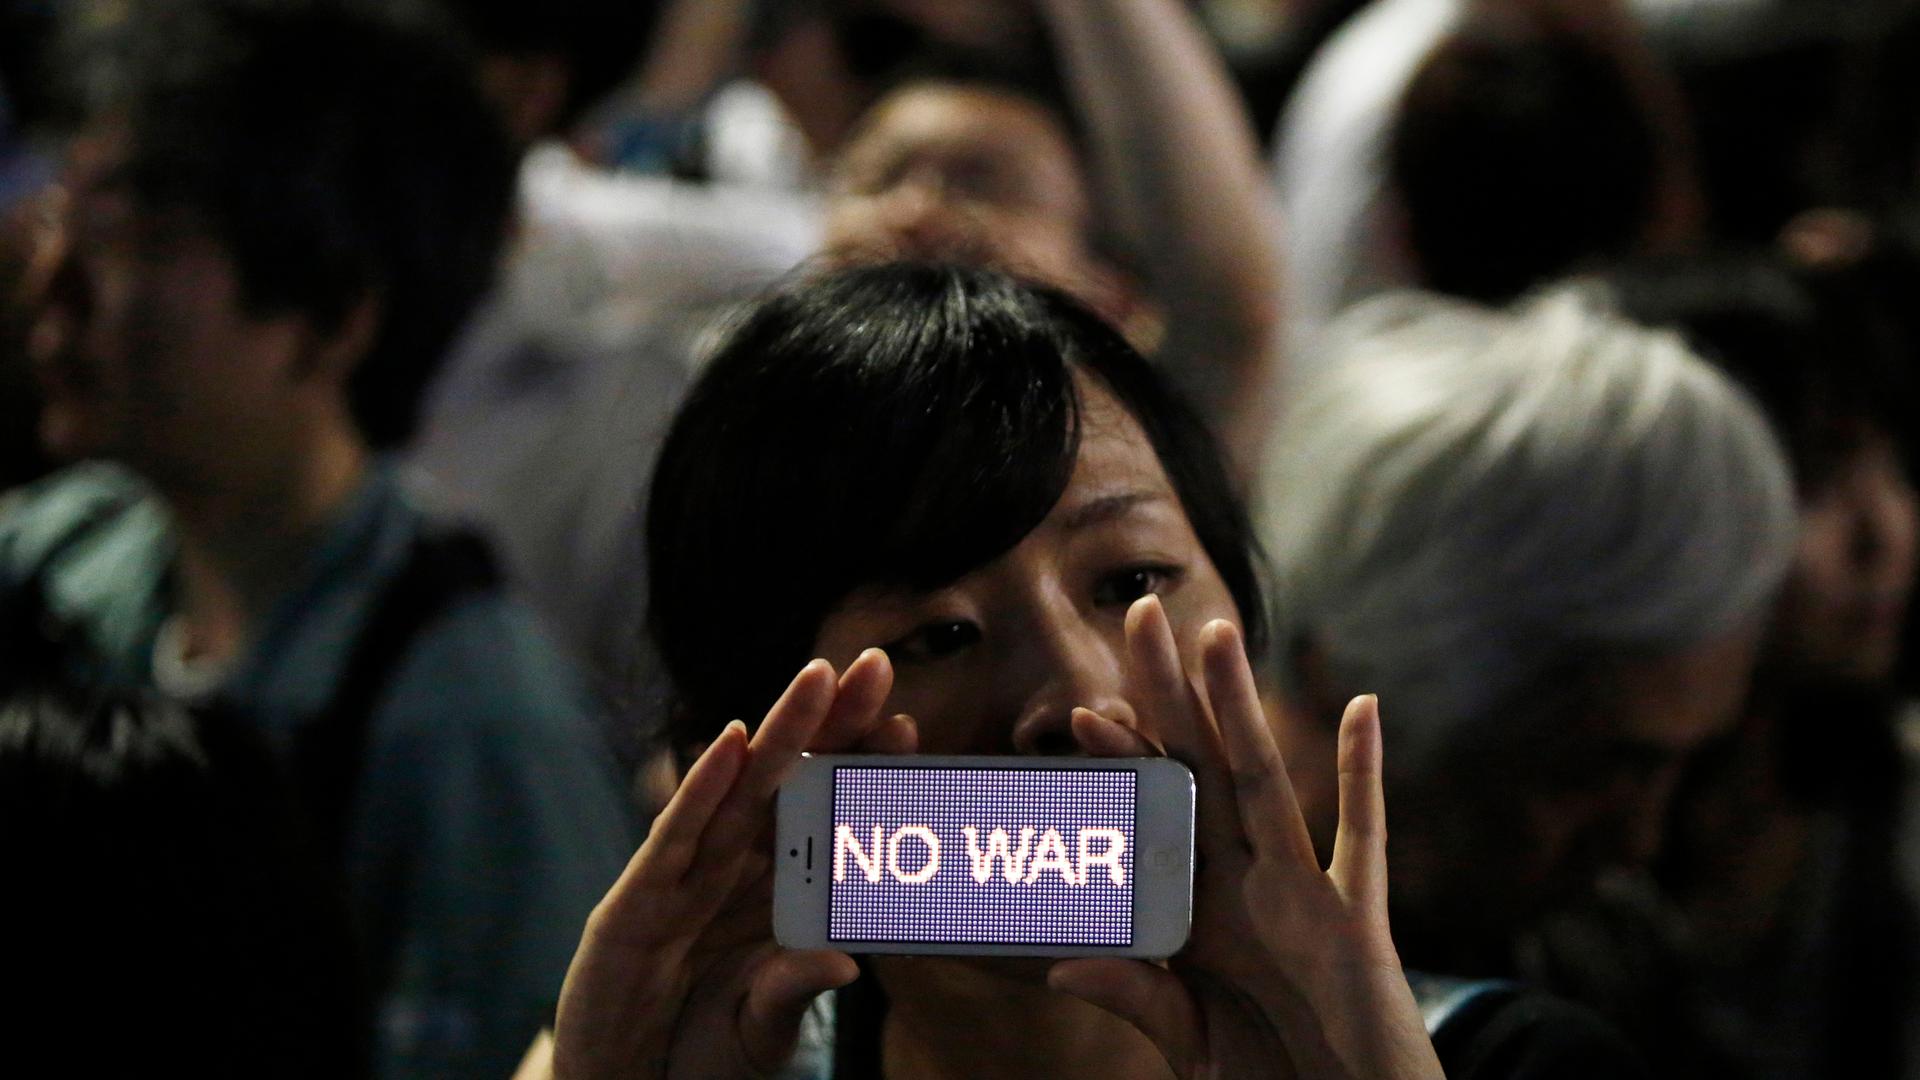 A protester at a rally against Japan's Prime Minister Shinzo Abe's push to expand Japan's military role.